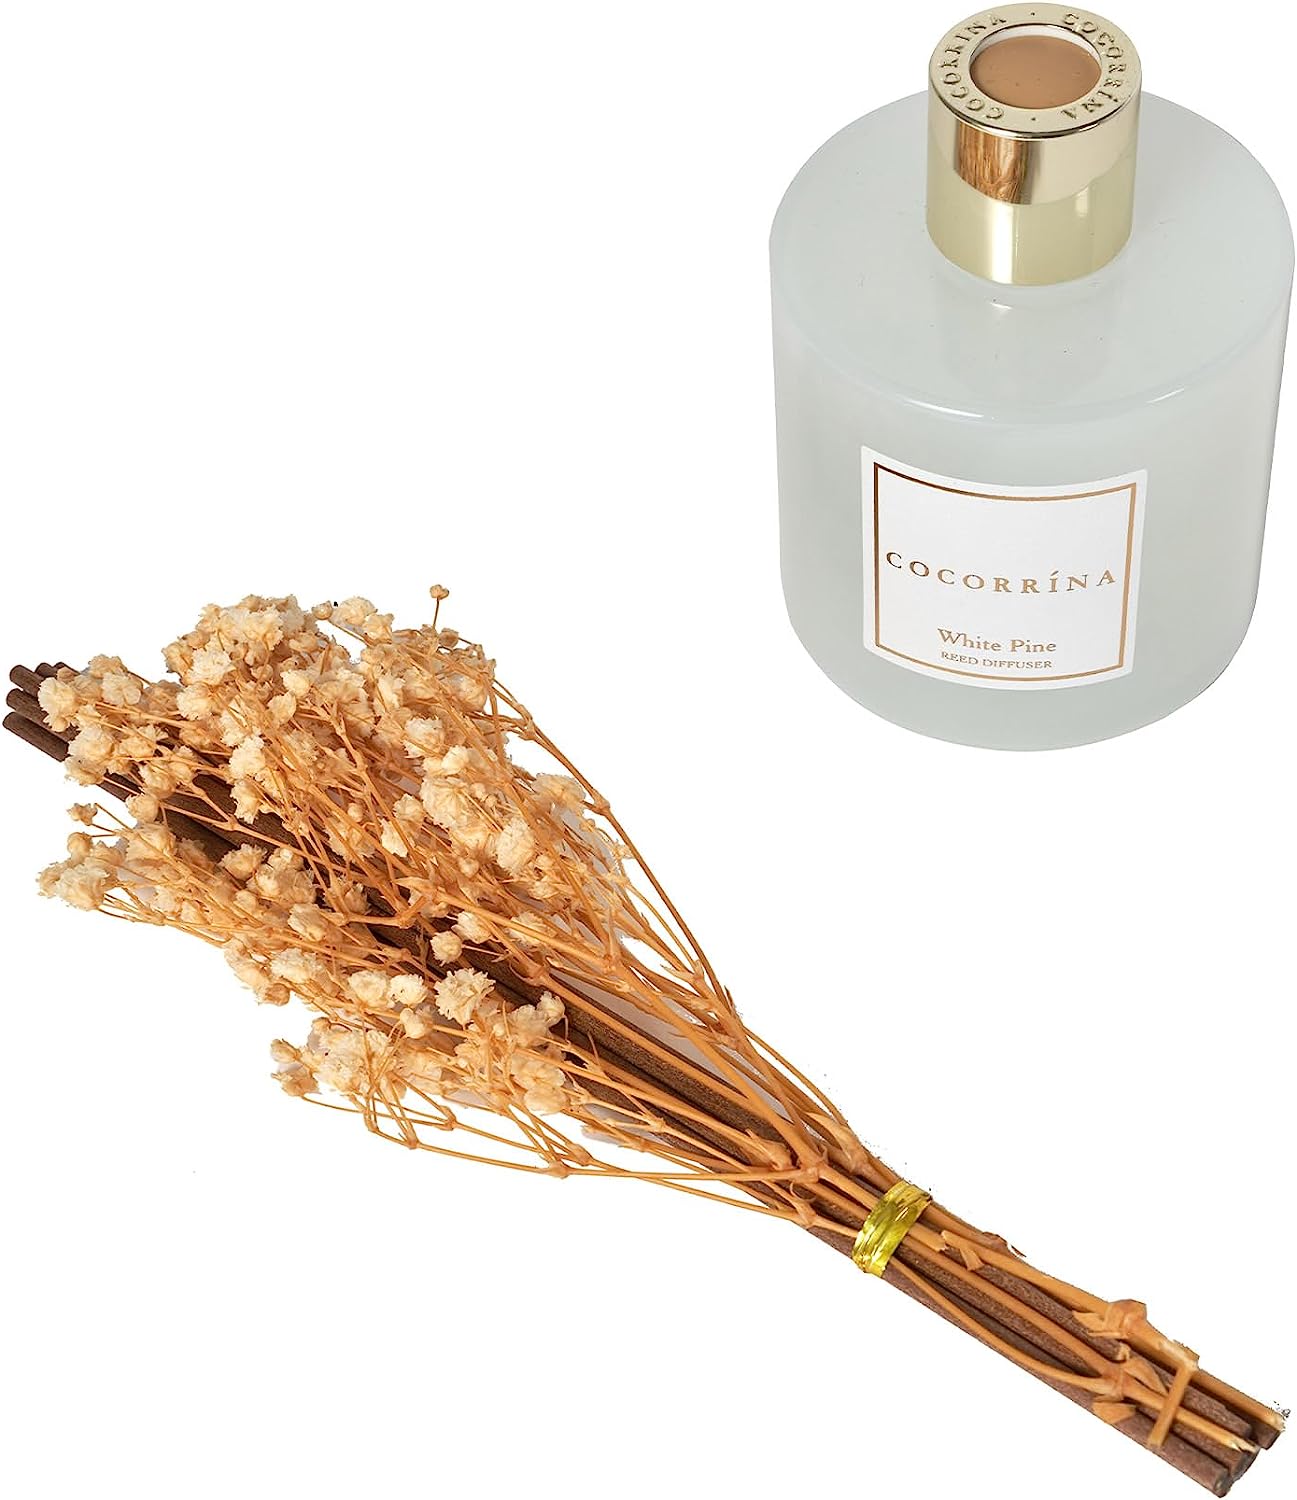 Cocorrína Mossy Pine Reed Diffuser Set w Preserved Baby's Breath